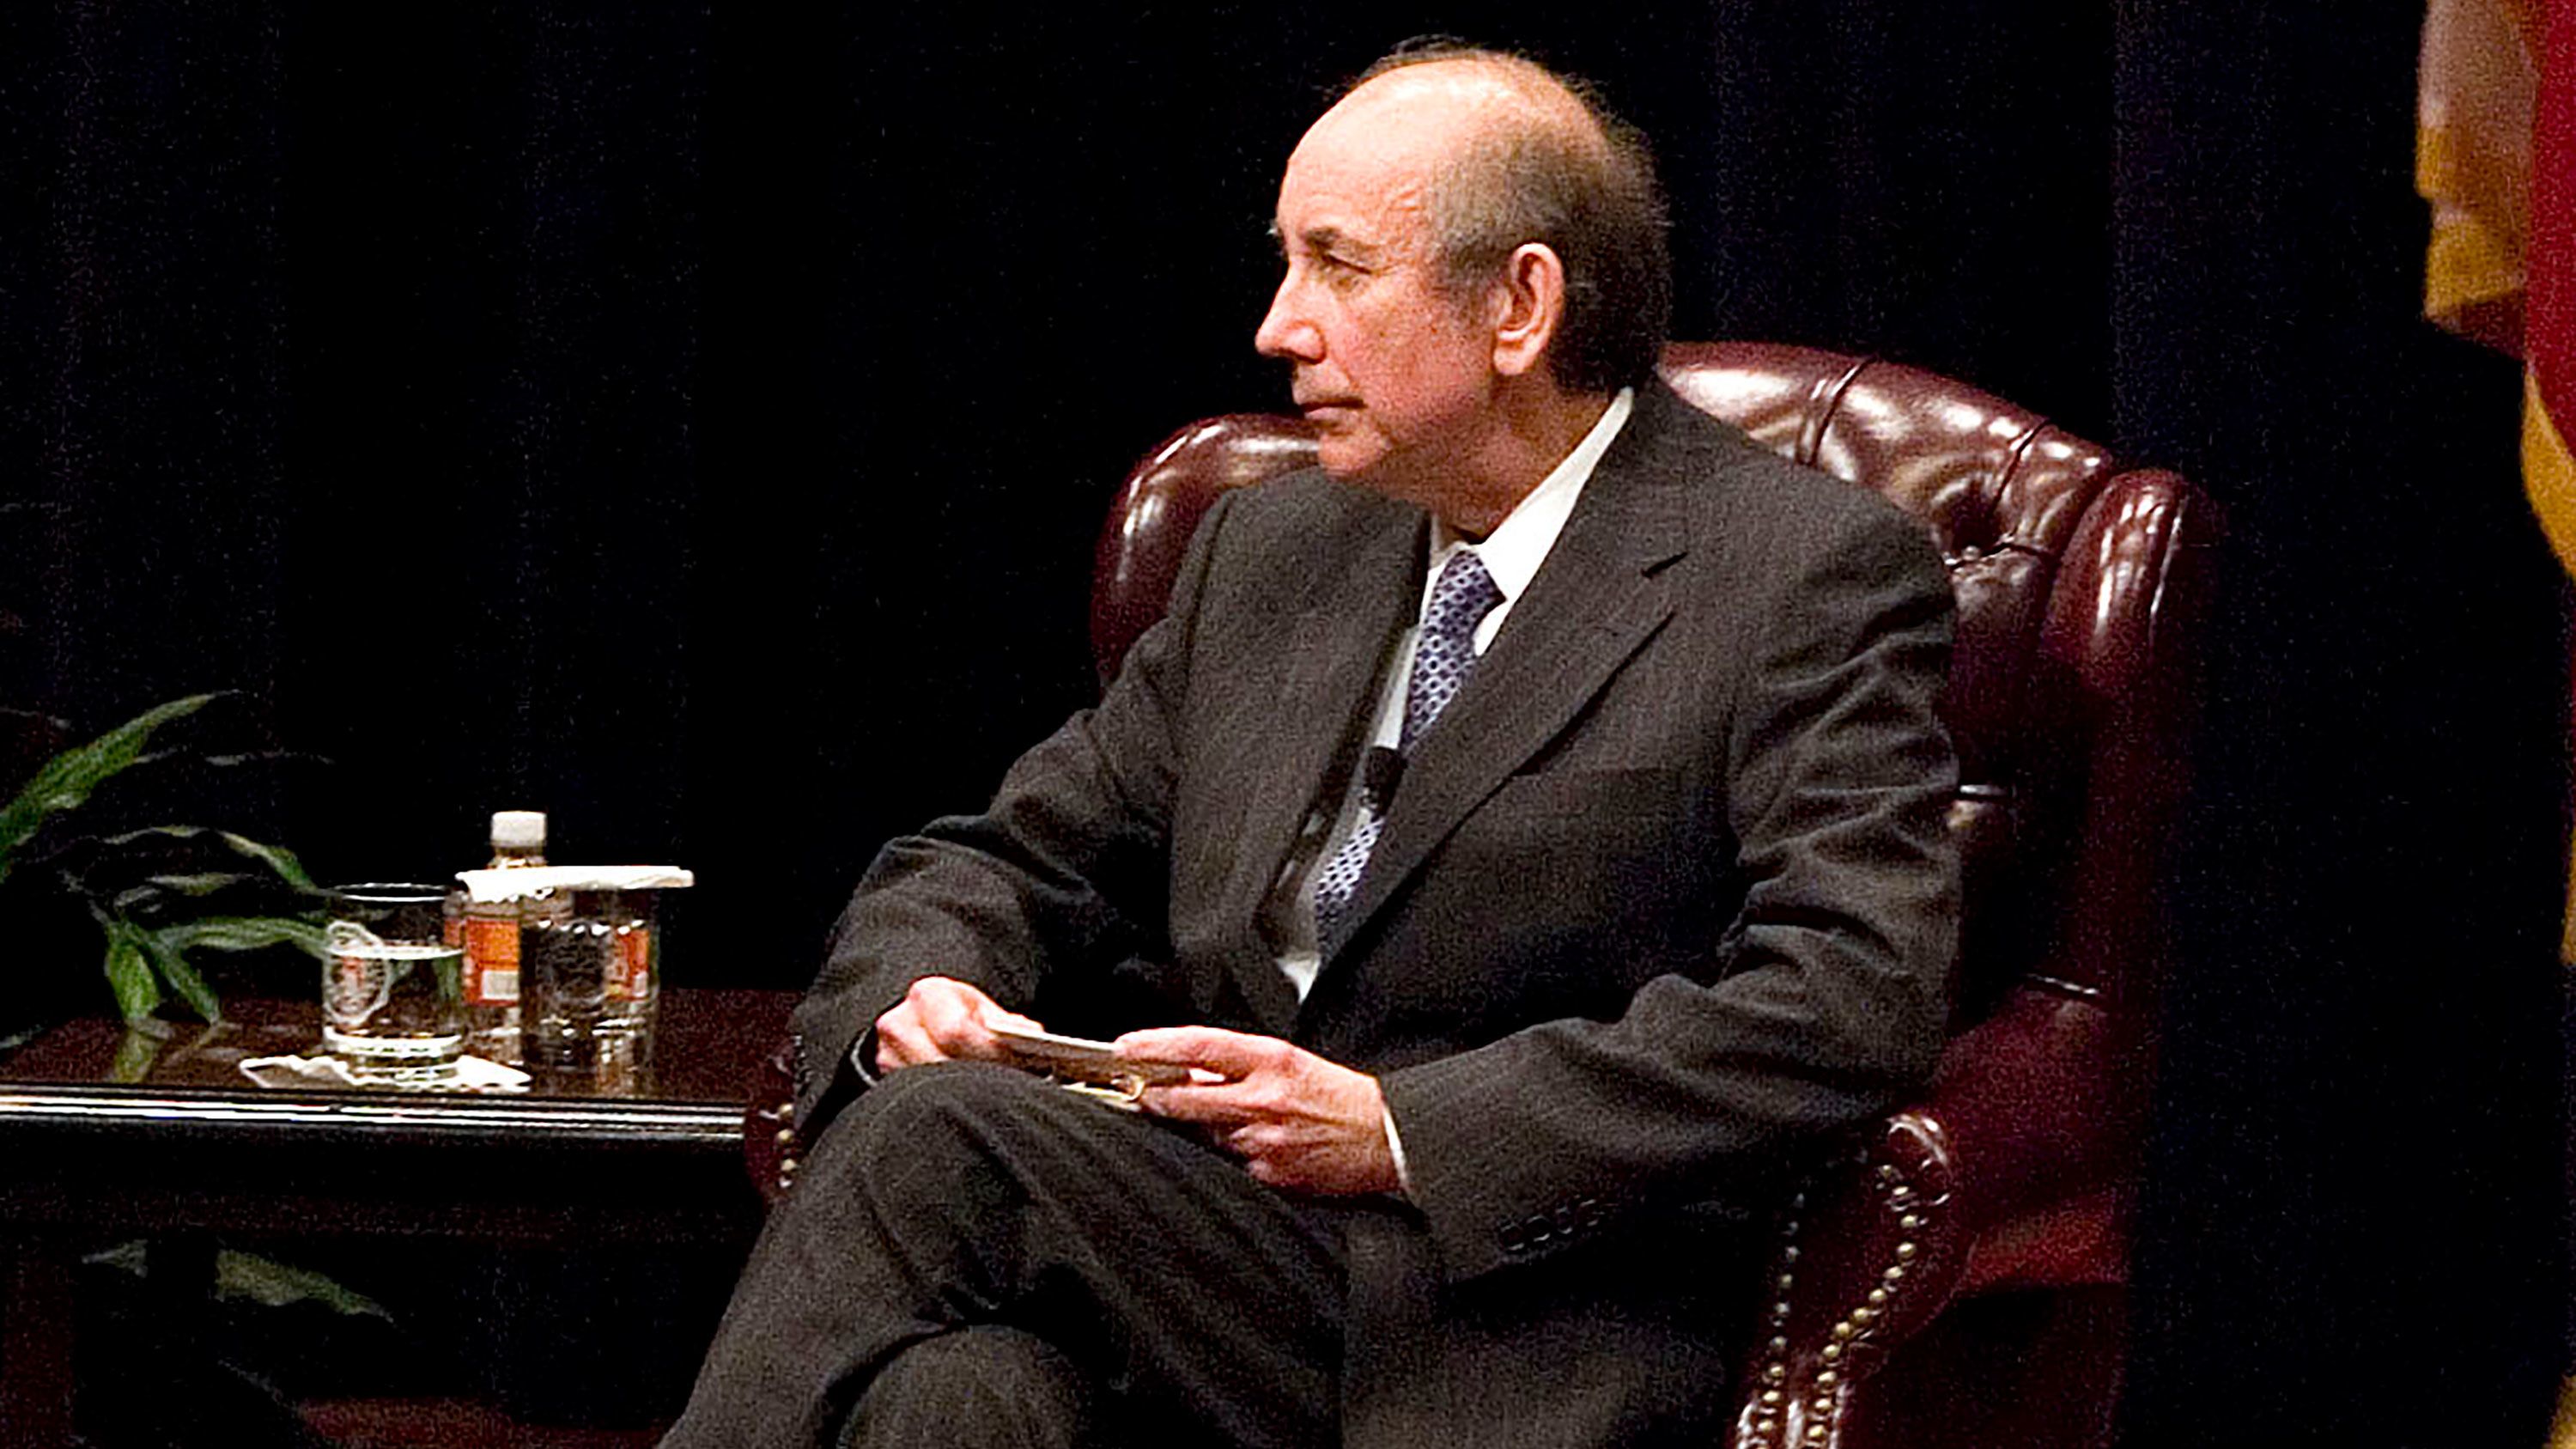 In this February 29, 2008, file photo, Roman Popadiuk is seen during the William Waldo Cameron Forum on Public Affairs at the George Bush Presidential Library at Texas A&M University in College Station, Texas.  